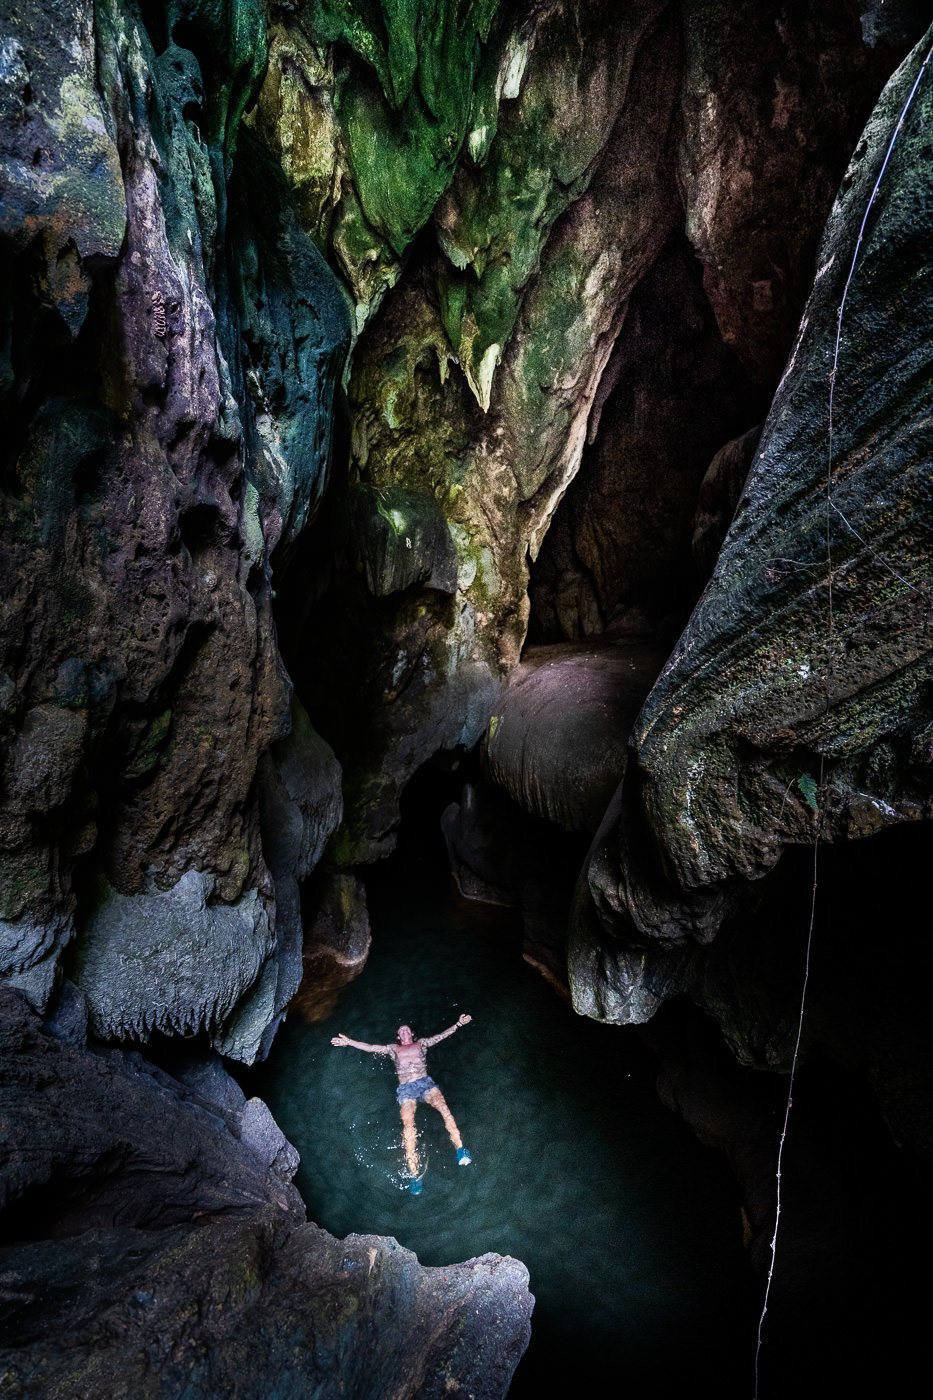 a person swimming in a pool of water in a cave.